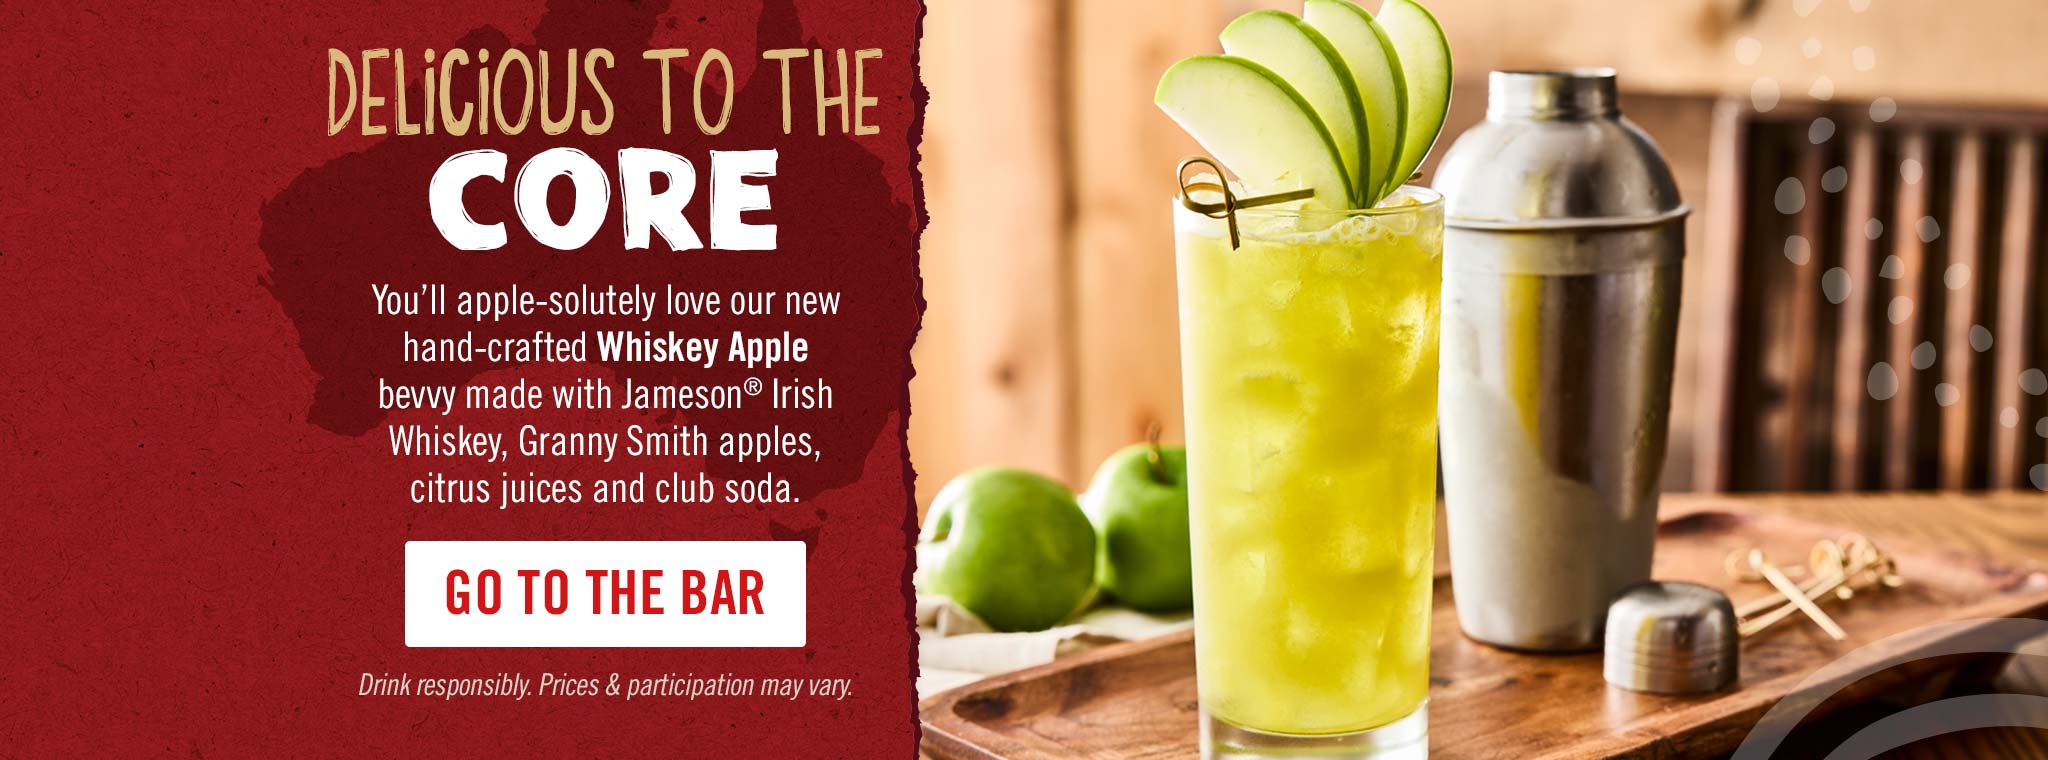 Delicious to the core. You’ll apple-solutely love our new hand-crafted Whiskey Apple bevvy made with Jameson® Irish Whiskey, Granny Smith apples, citrus juices and club soda.